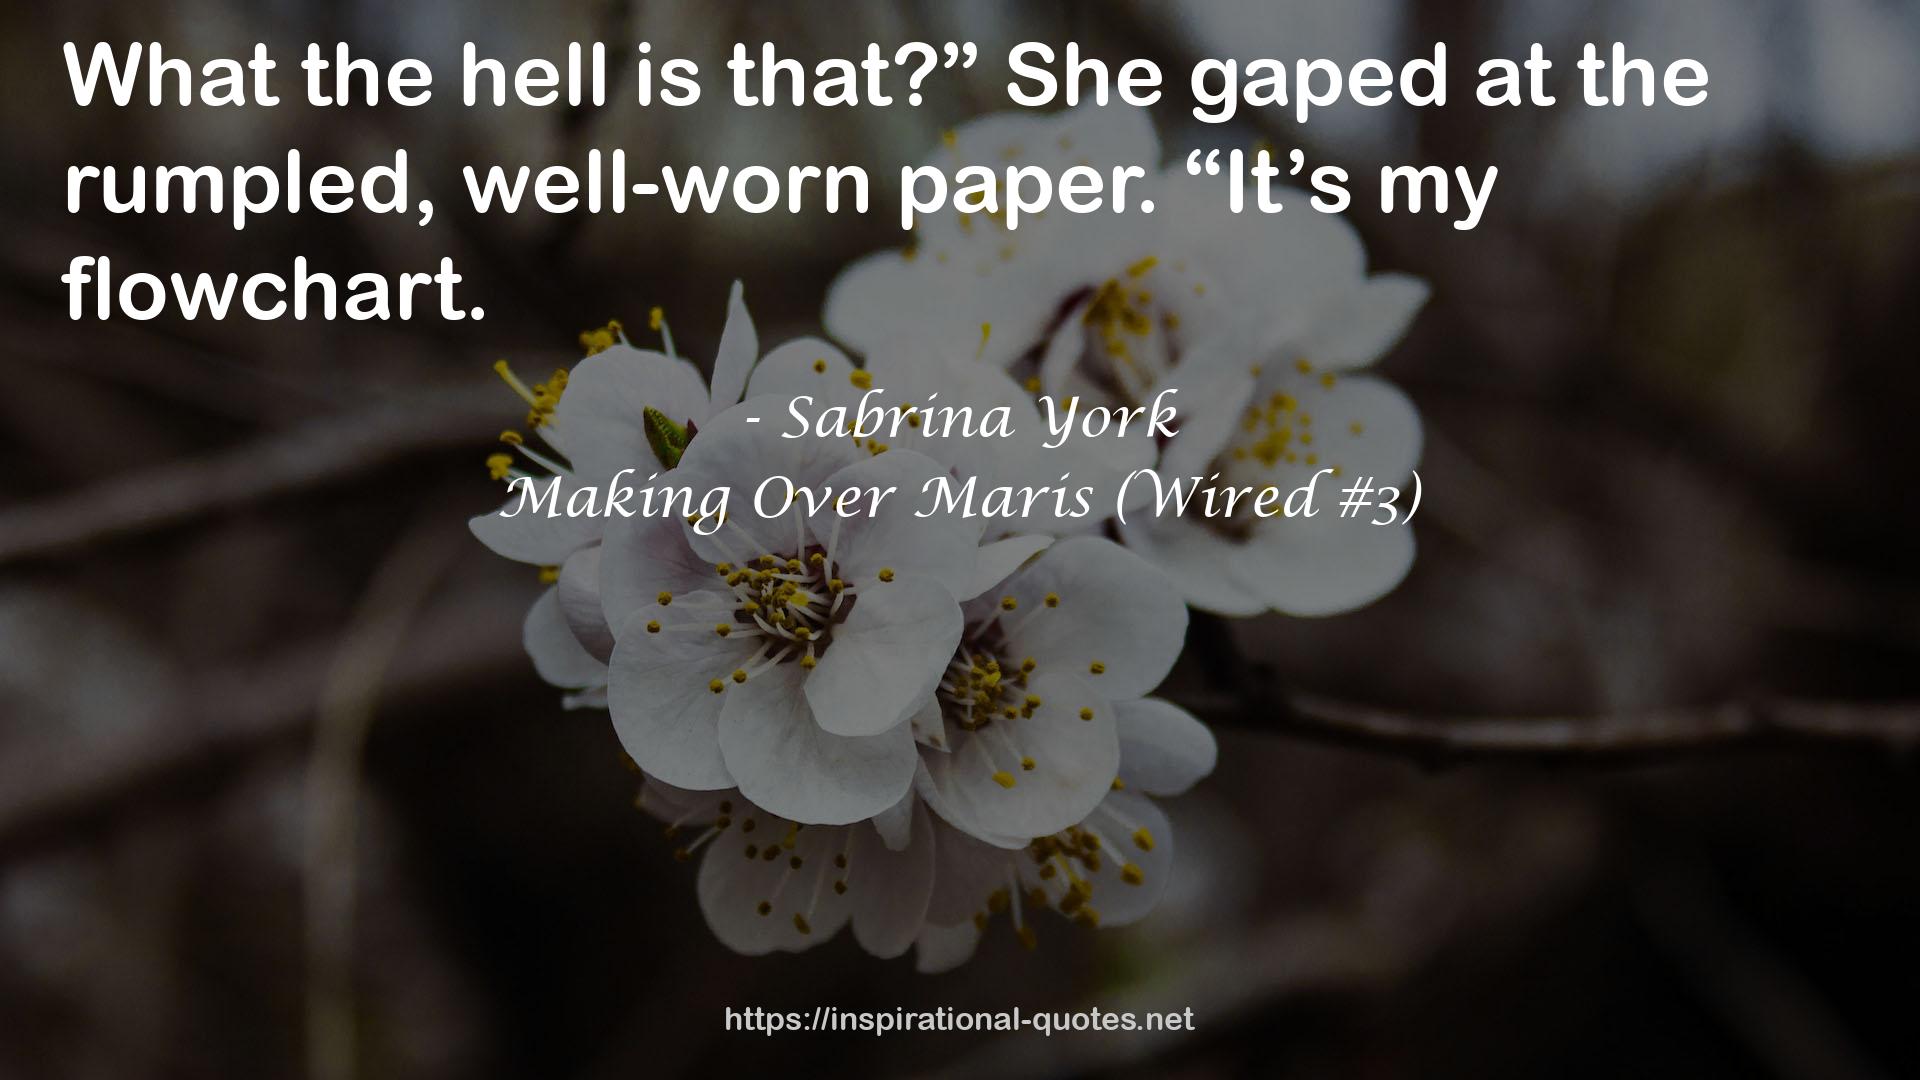 Making Over Maris (Wired #3) QUOTES